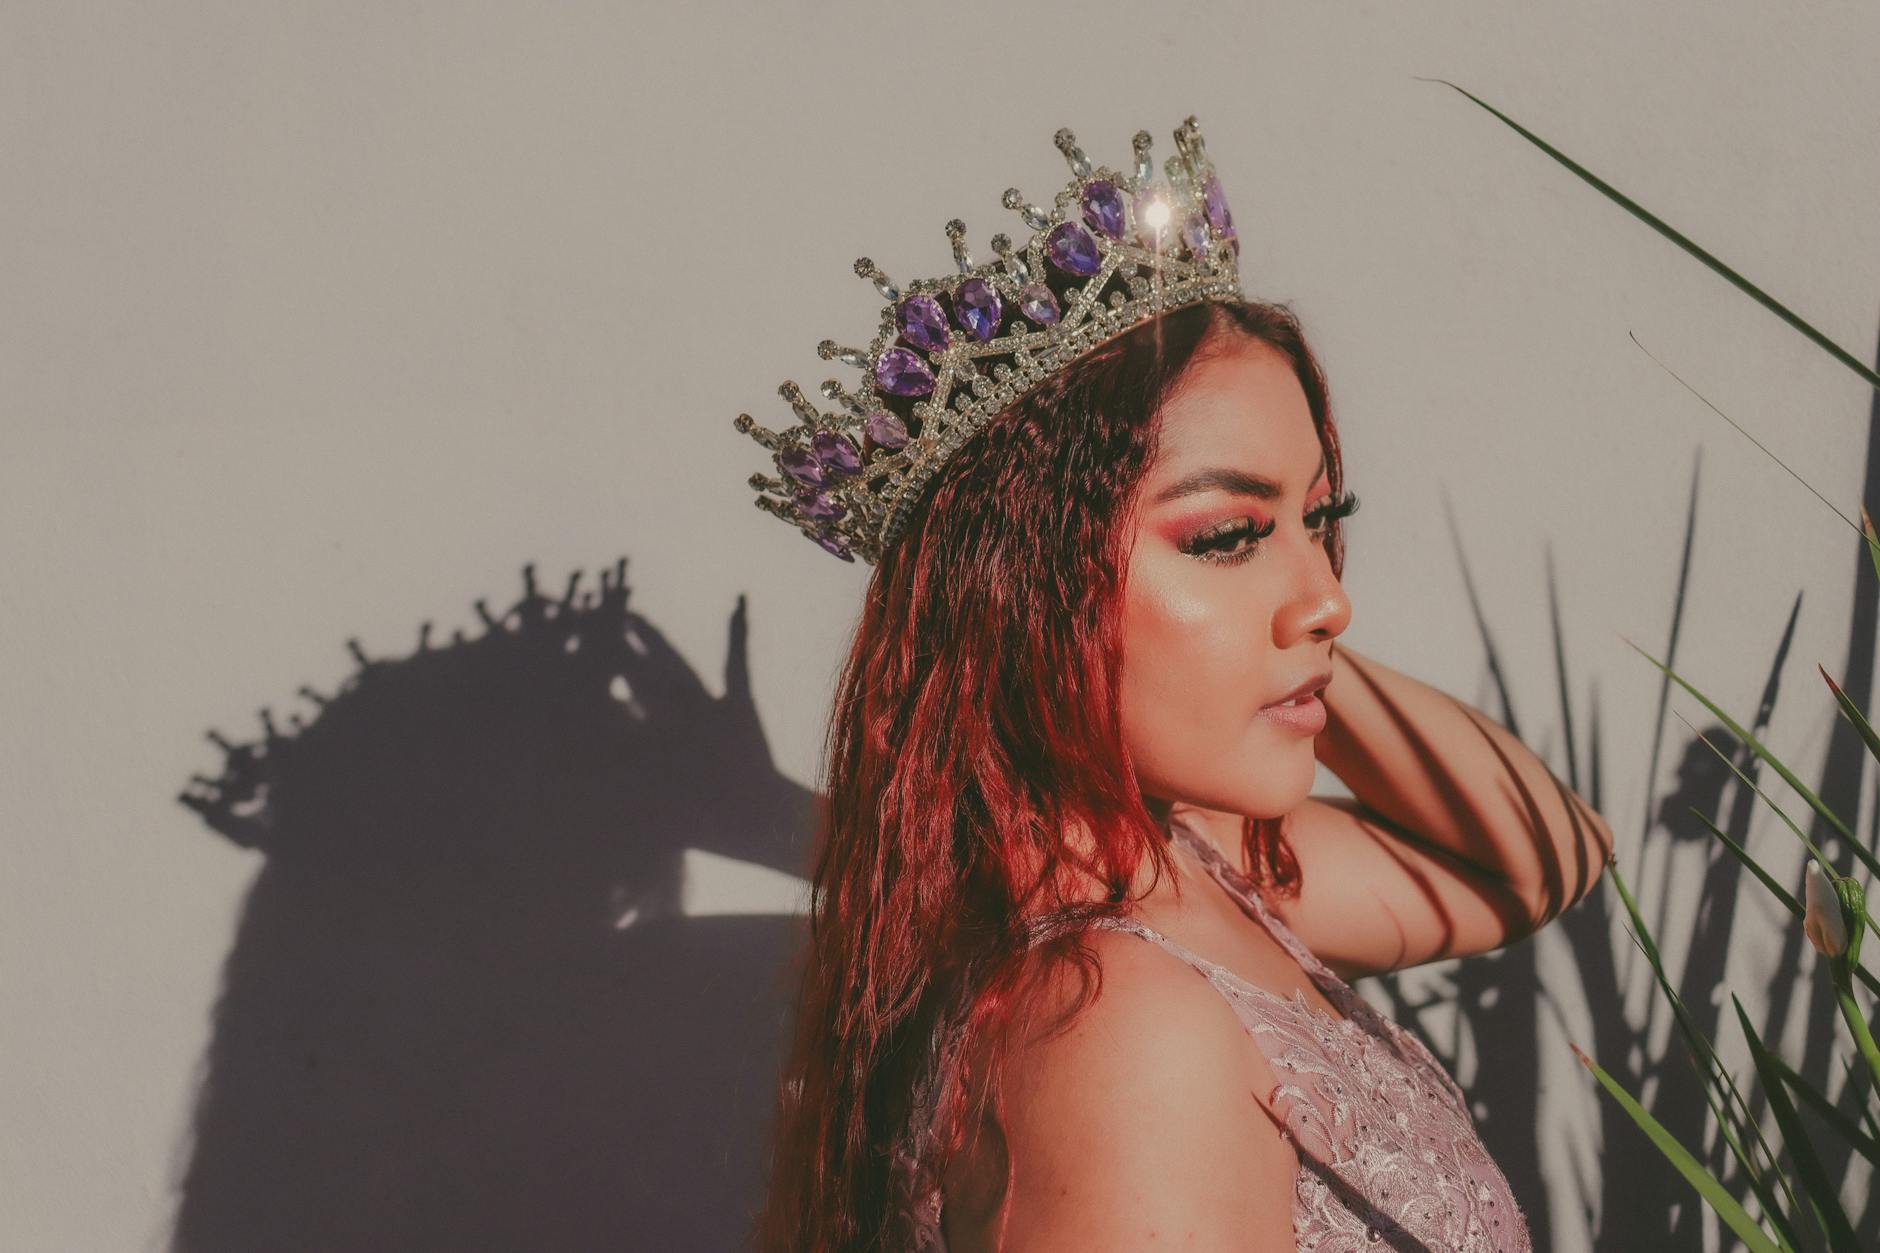 model wearing a crown with purple crystals